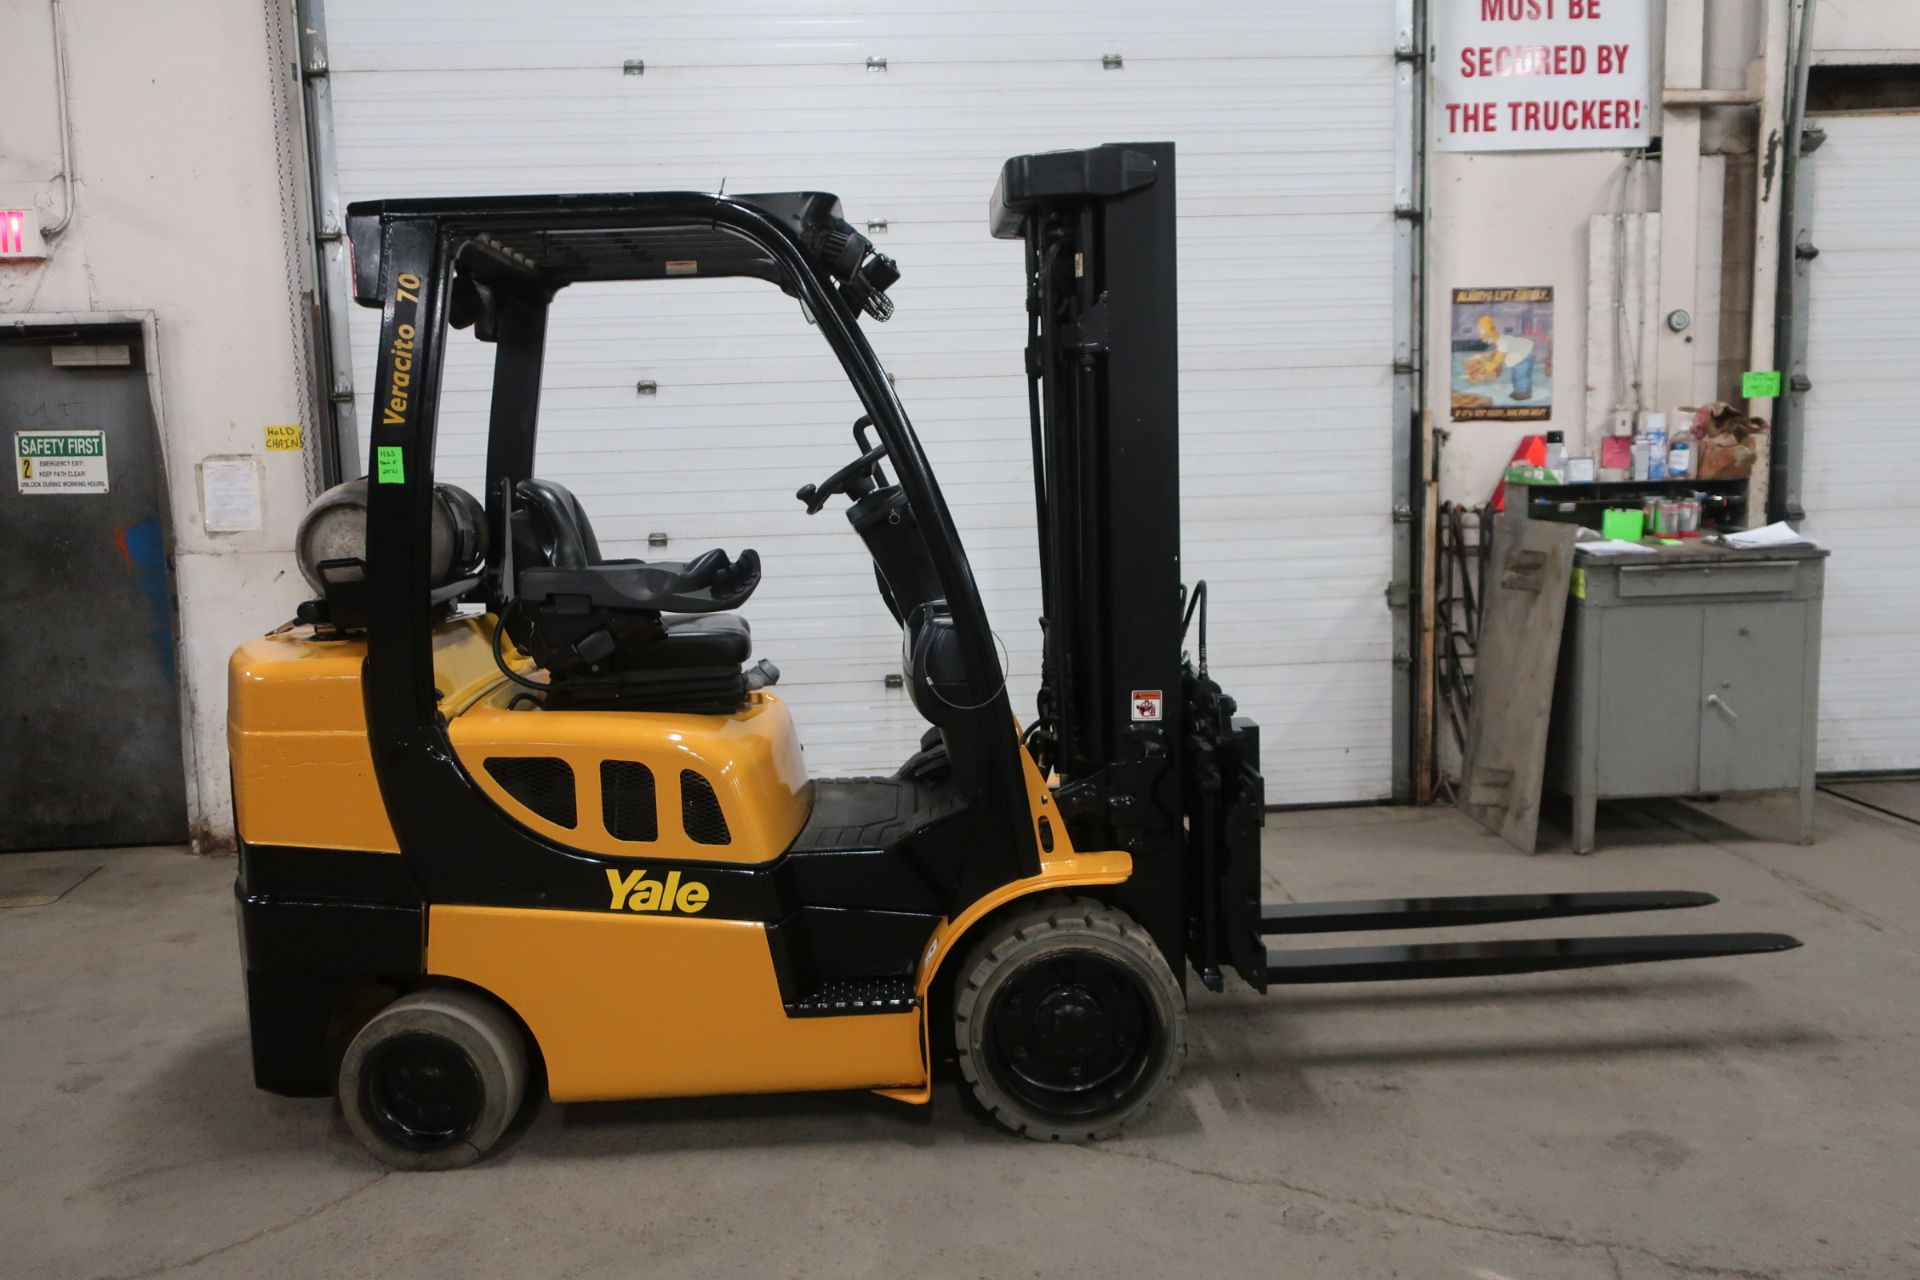 FREE CUSTOMS - 2018 Yale 7000lbs capacity LPG (propane) Forklift with 3-stage with sideshift